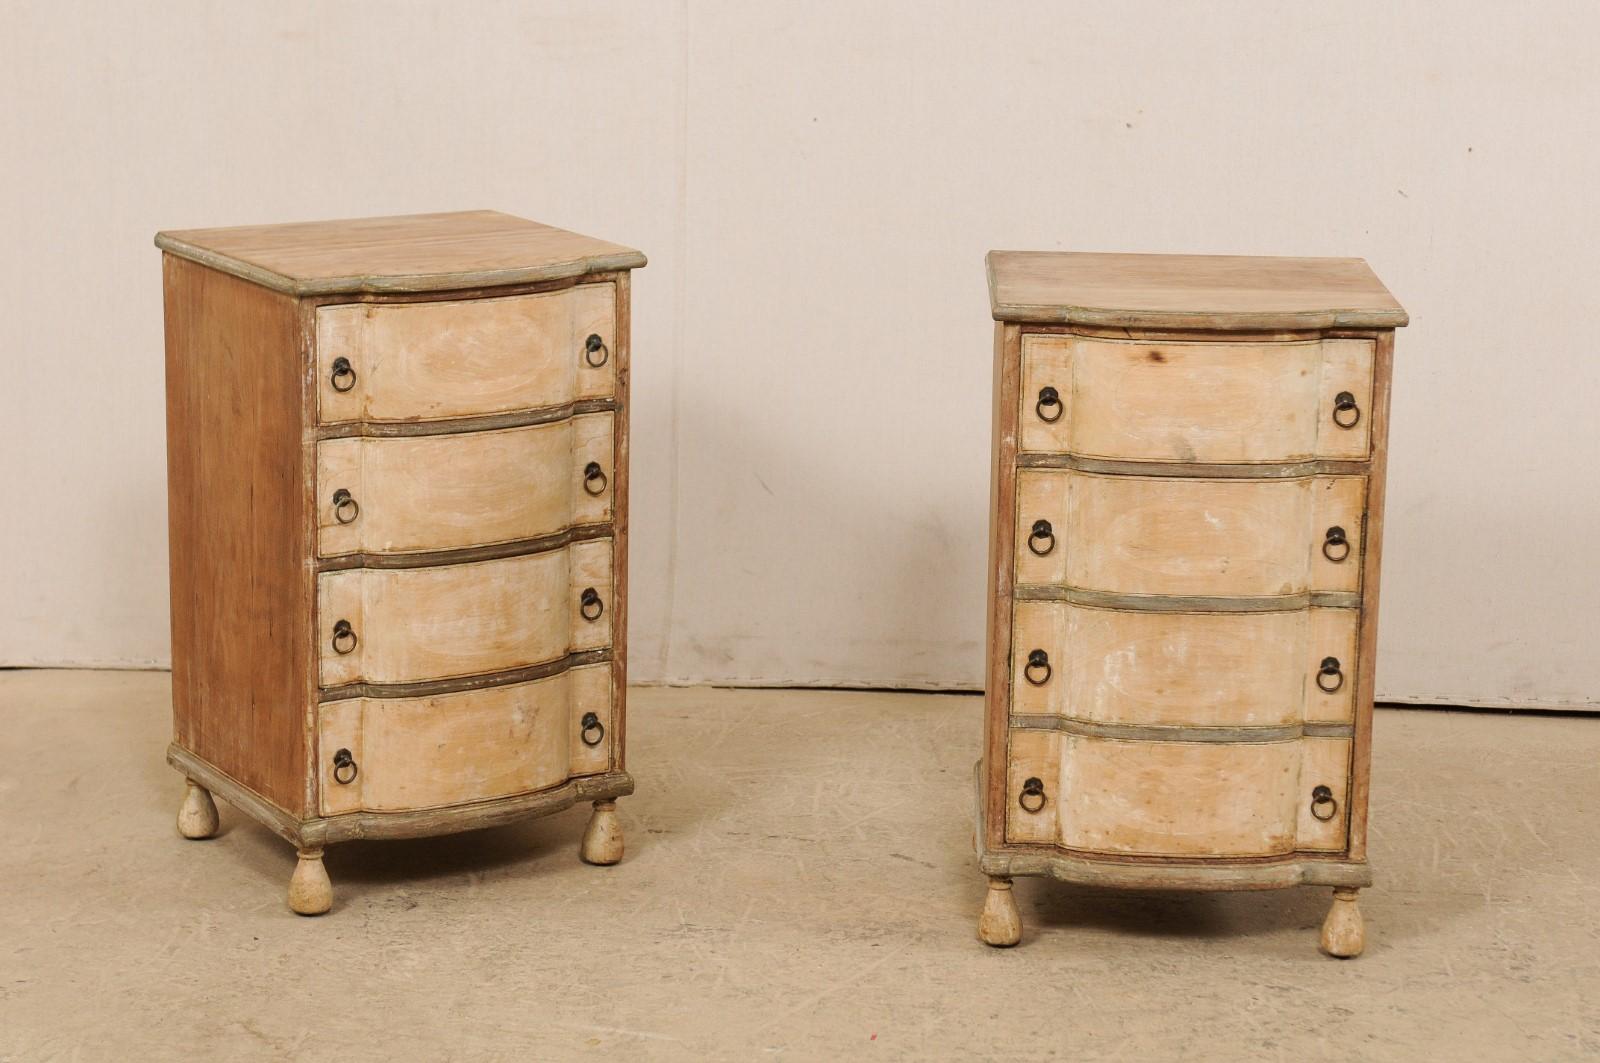 An Italian pair of small sized wooden chests from the 1920s-1930s. This antique pair of comodini from Italy each features a bow-front top over case with matching body, which houses a four-drawer front; however, only one of the commodes has four